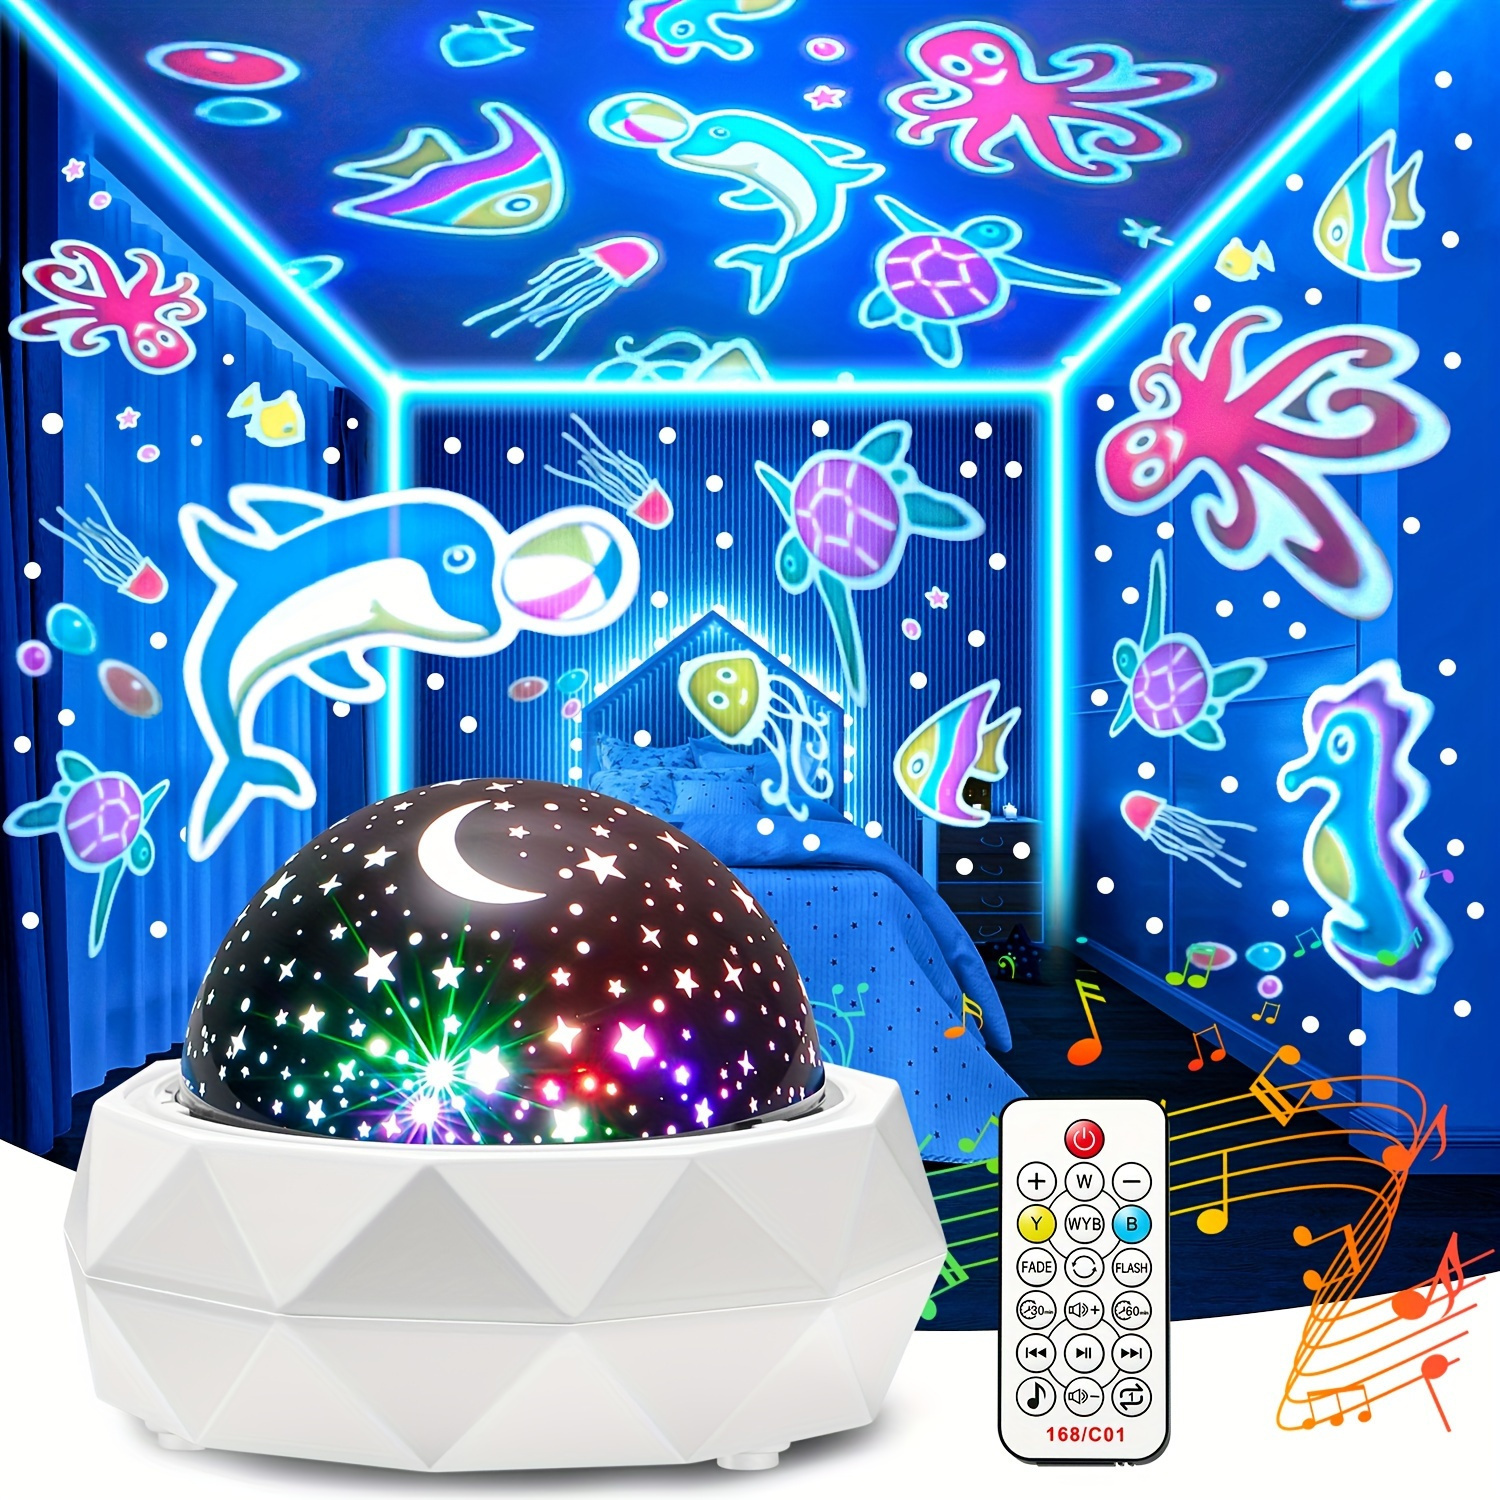 

8 Colors+3 360° Night Light Projector With 12 Soothing Sounds And Films - Remote Control And Auto Timer - Perfect Christmas Gift